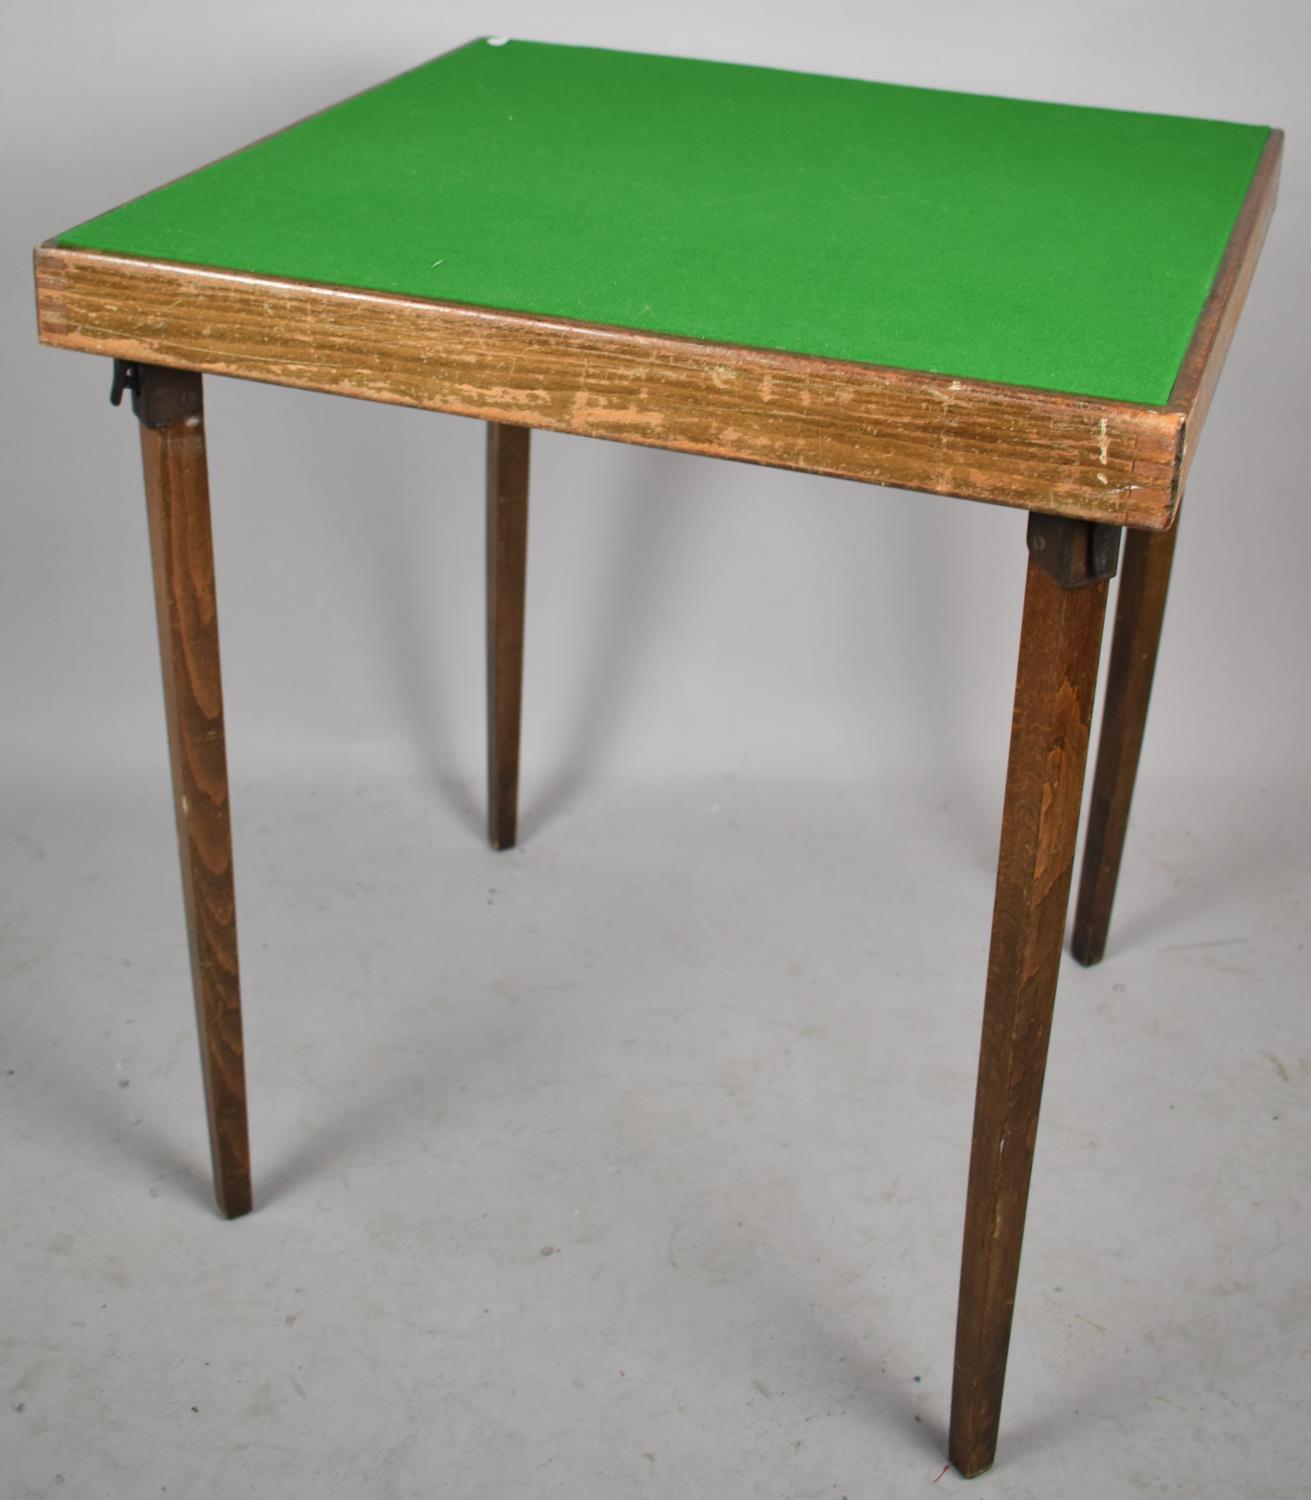 A Square Based Topped Whist Table, 61cm